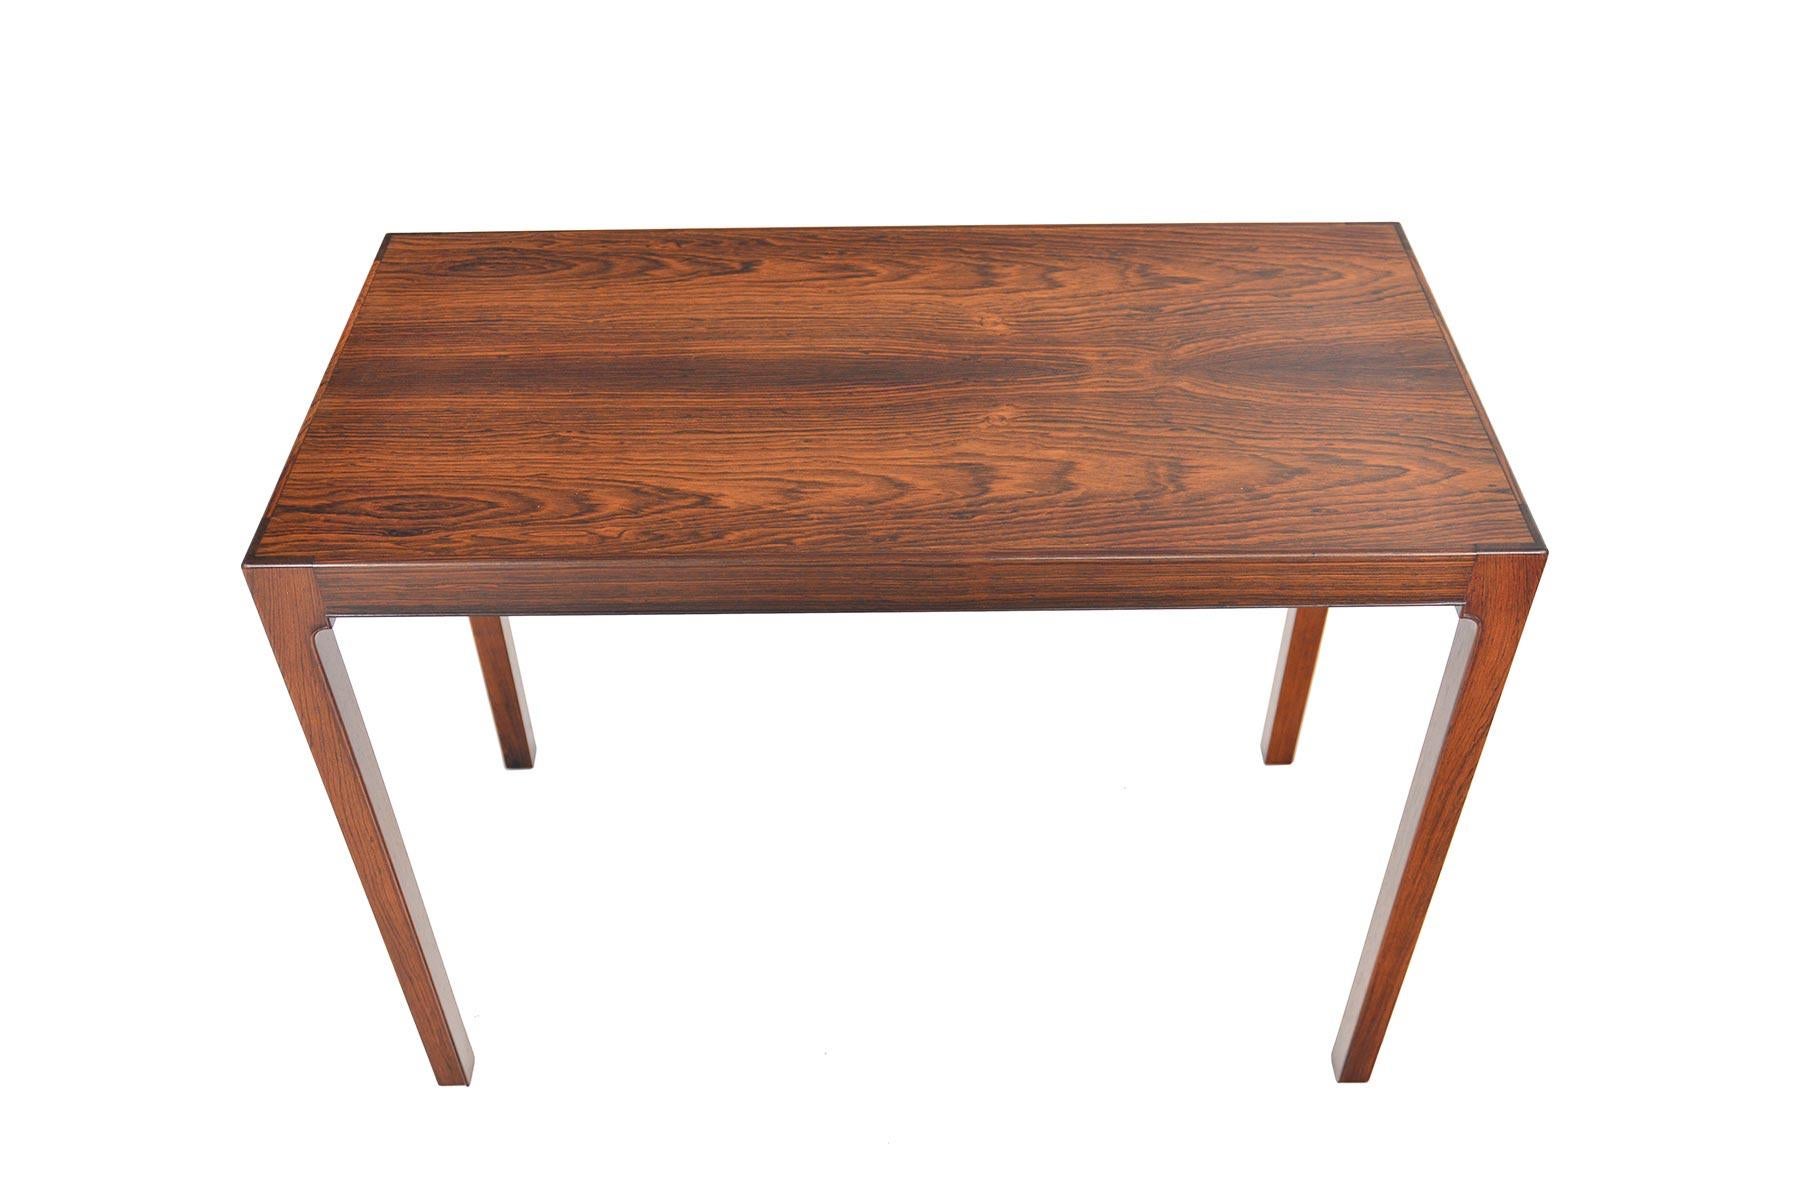 This Danish modern midcentury console table is a rare design. Constructed in Brazilian rosewood, this tall and elegant piece is perfect for any entry, foyer, or living room in need of table height storage. In excellent original condition with